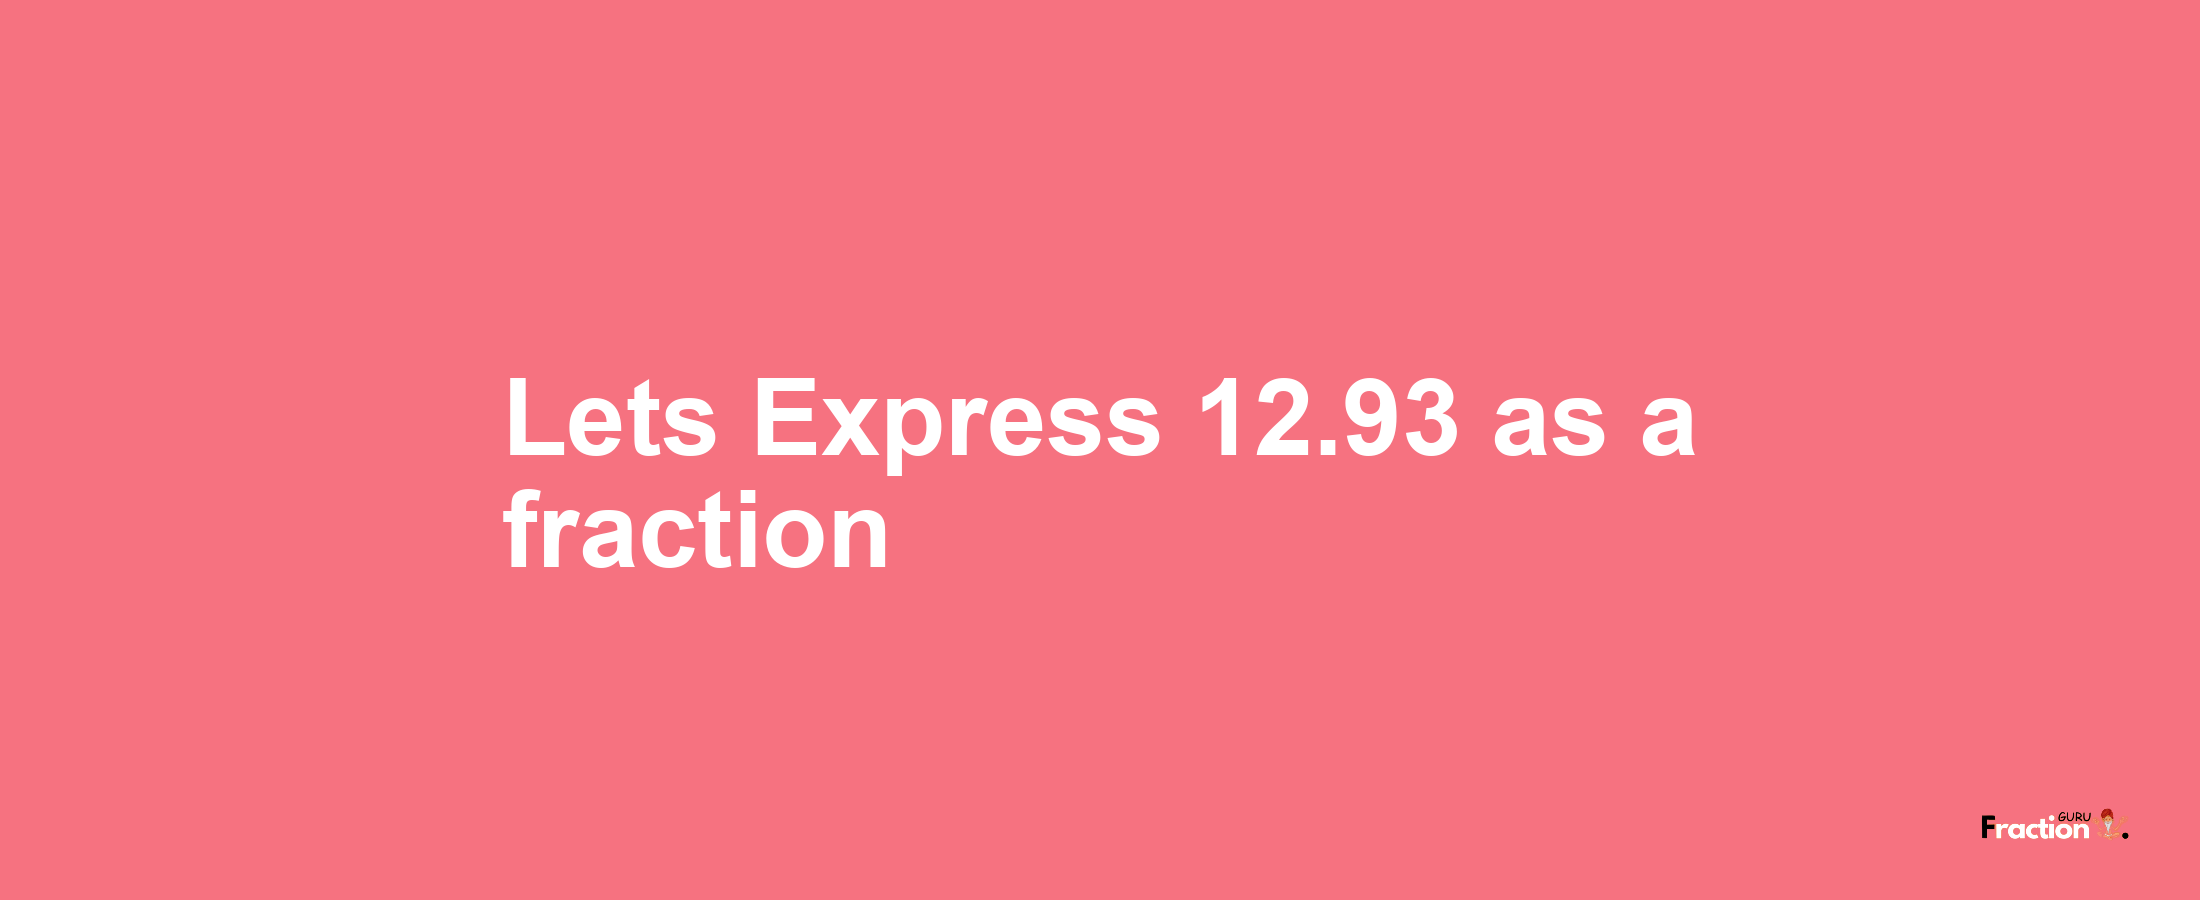 Lets Express 12.93 as afraction